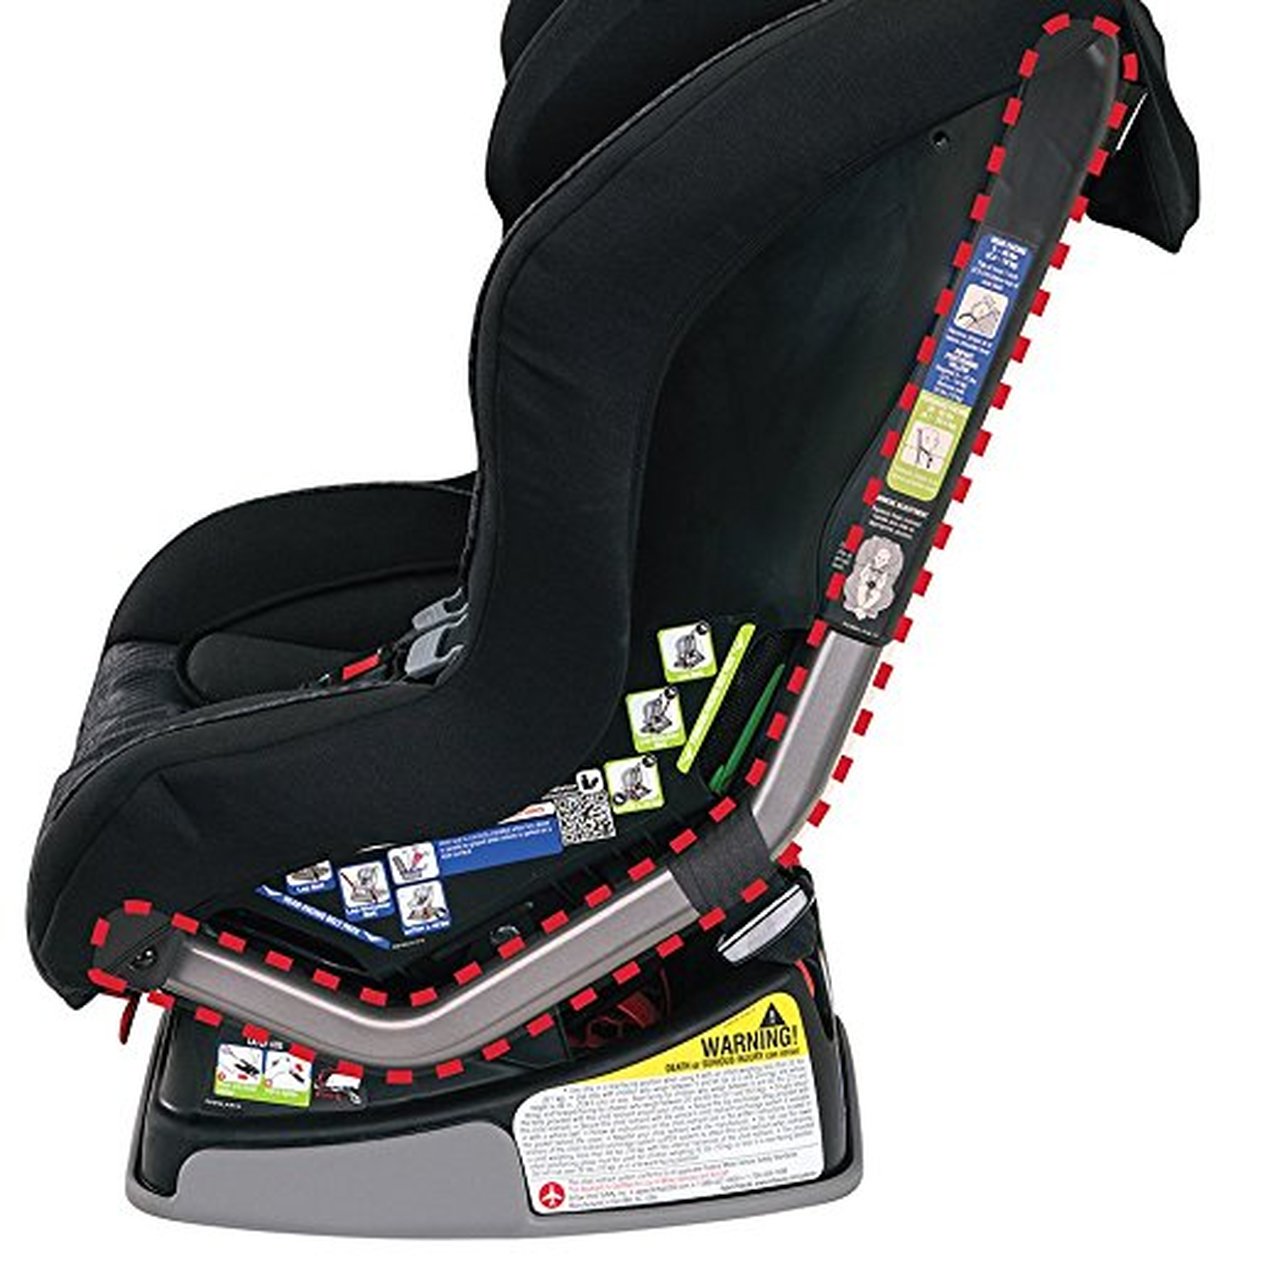 Britax Roundabout G4.1 Convertible Car Seat Front and Rear Facing